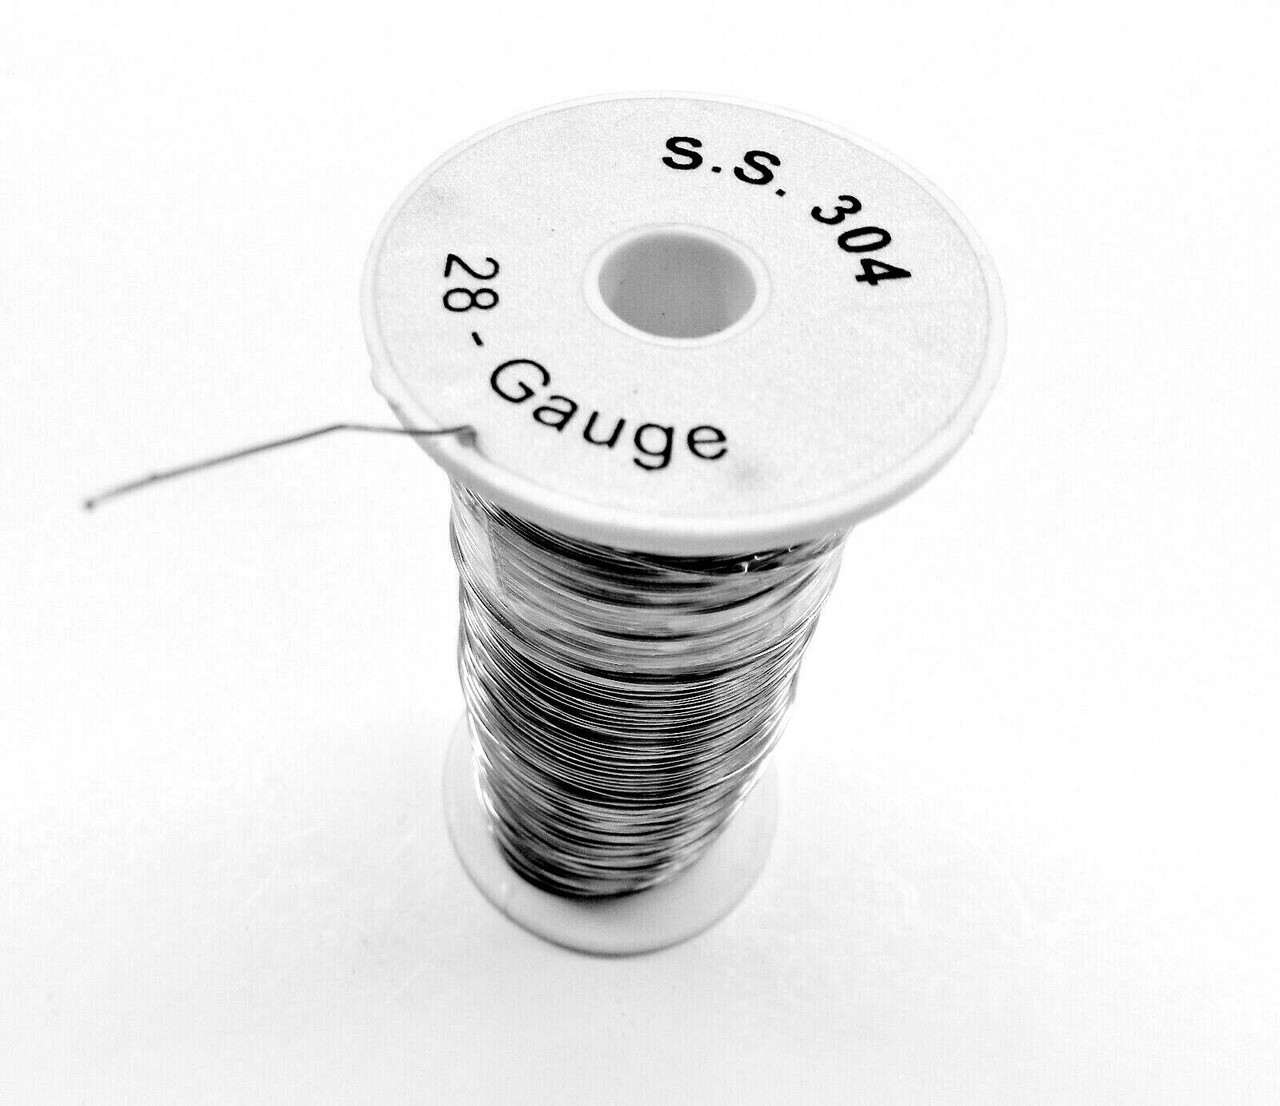 26ga Stainless Steel Wire Dead Soft Binding Wire Soldering 1/2lb Jewelry  Making